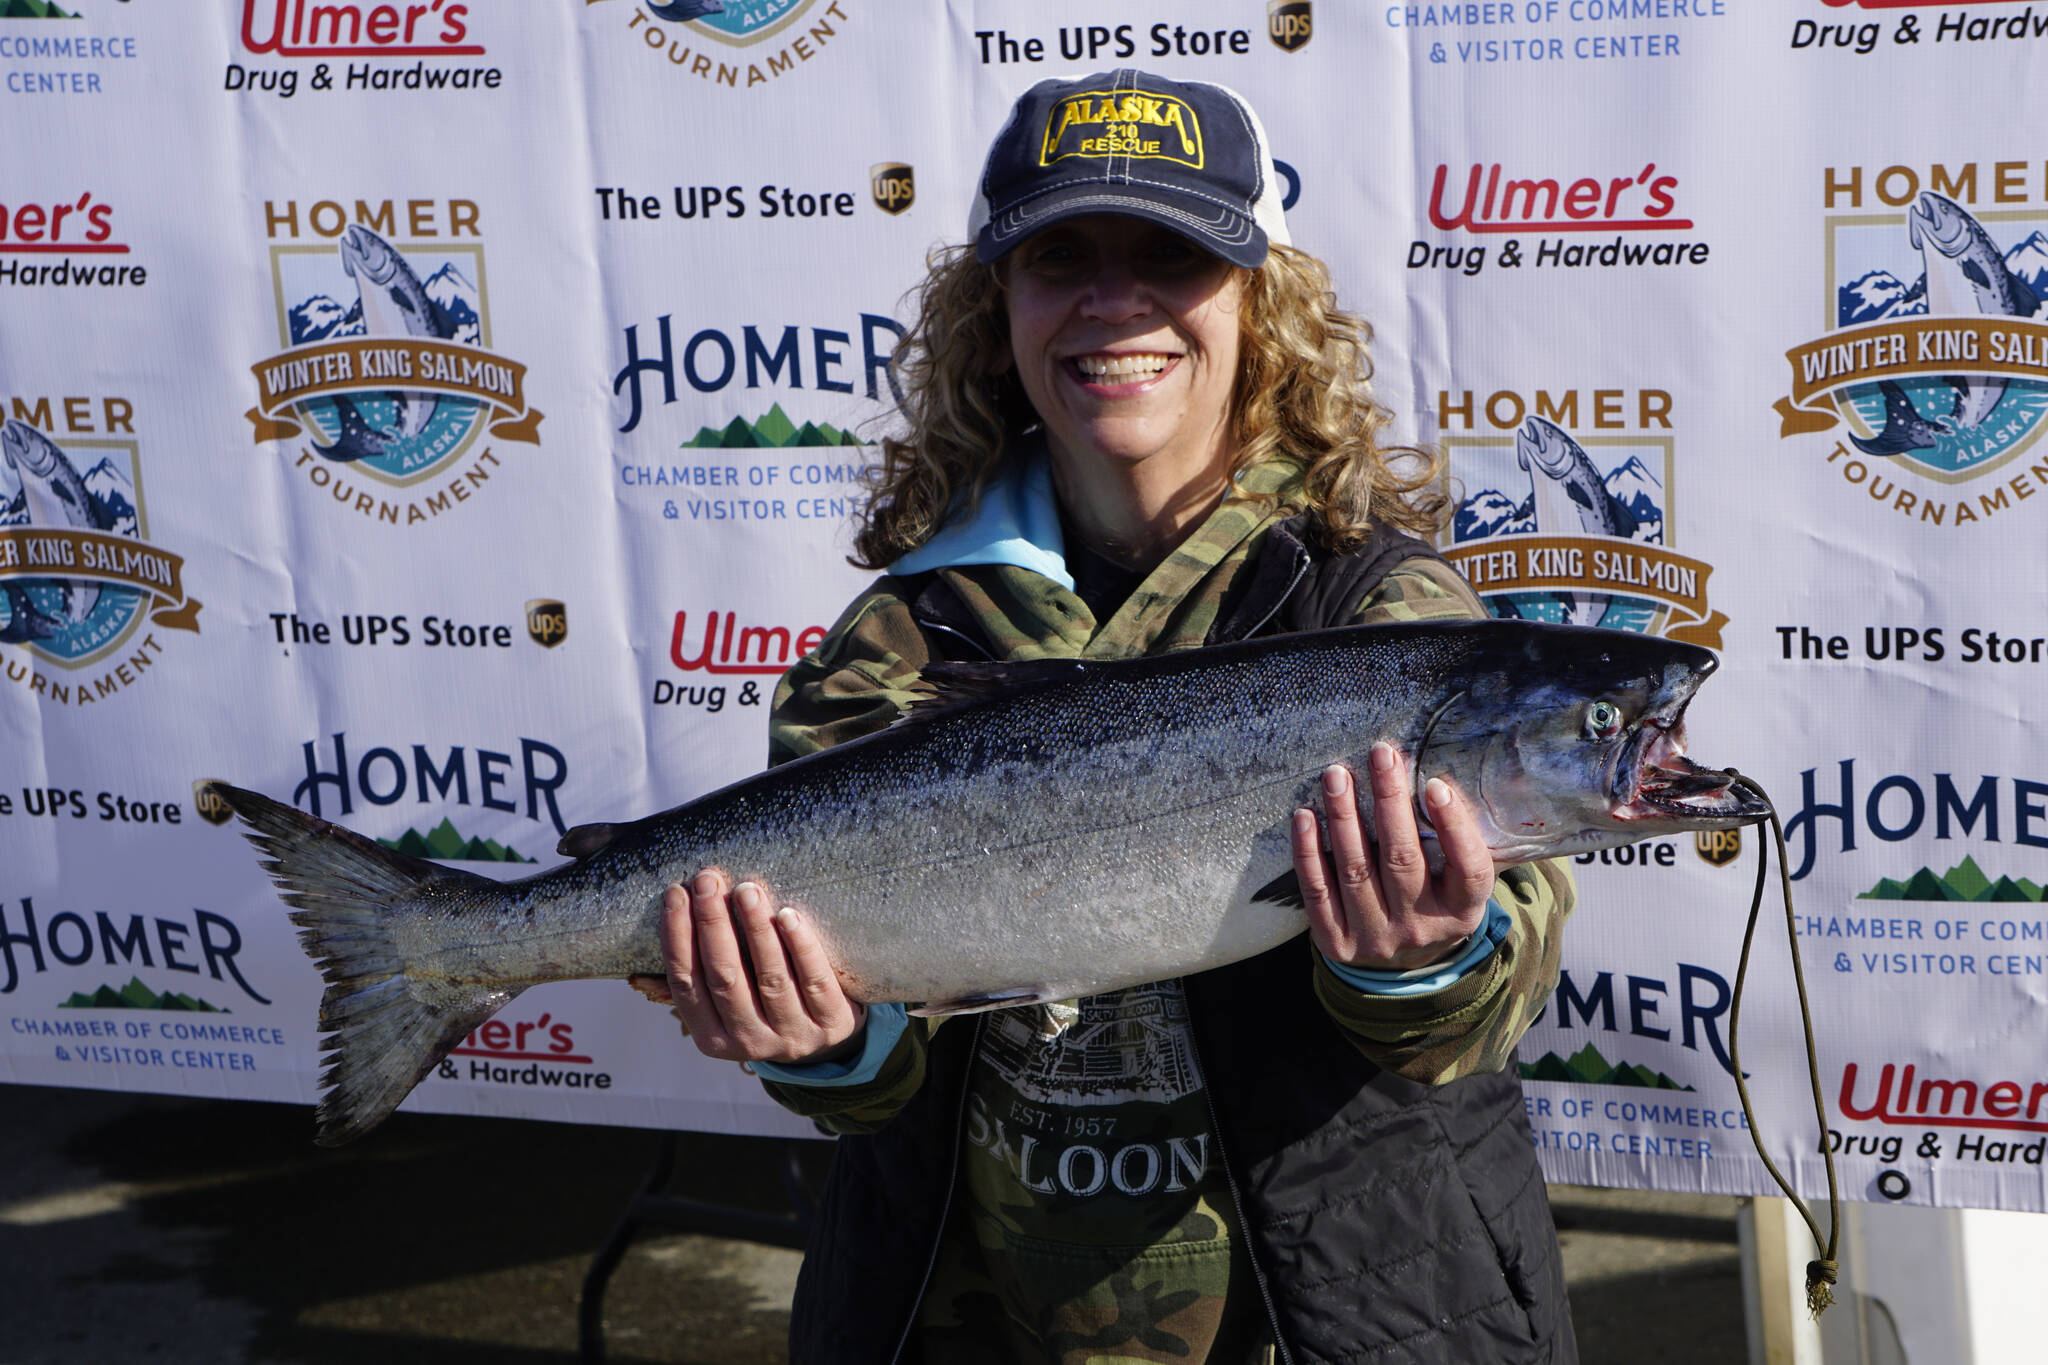 Mary Jo Porter holds the 9.24-pound winter king salmon she caught in the 28th annual Homer Winter King Salmon Tournament on Sunday, April 10, 2022, in Kachemak Bay, Homer, Alaska. (Photo by Michael Armstrong/Homer News)